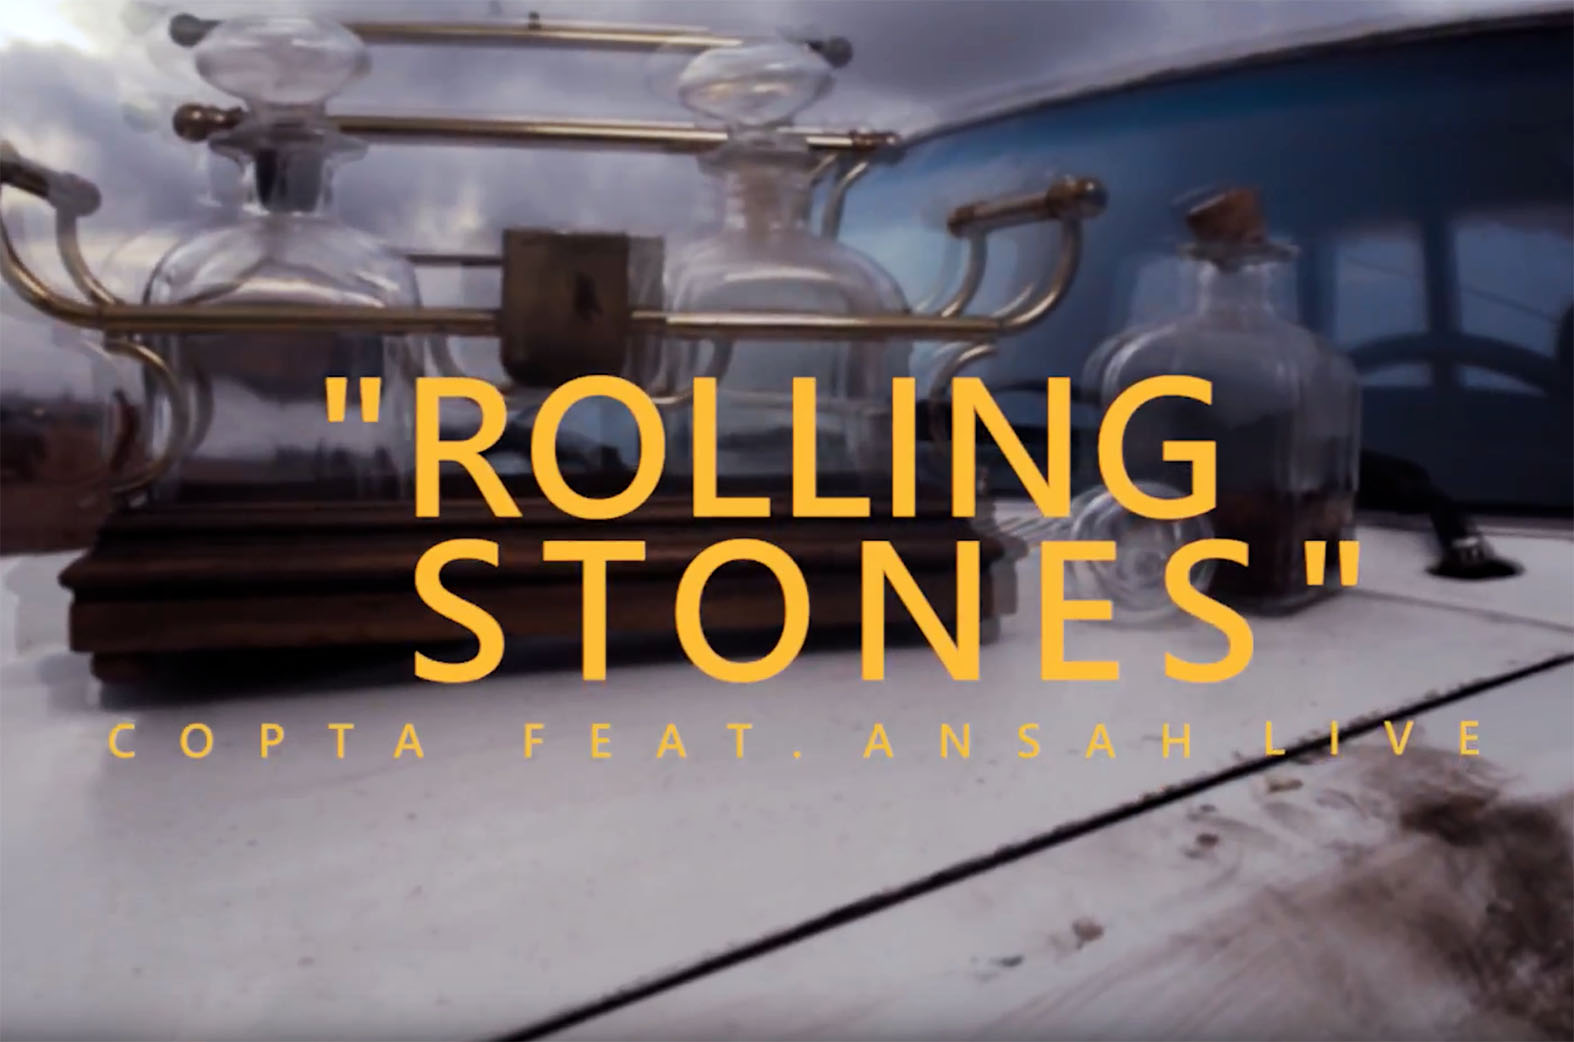 Video: Rolling Stones by Copta feat. Ansah Live